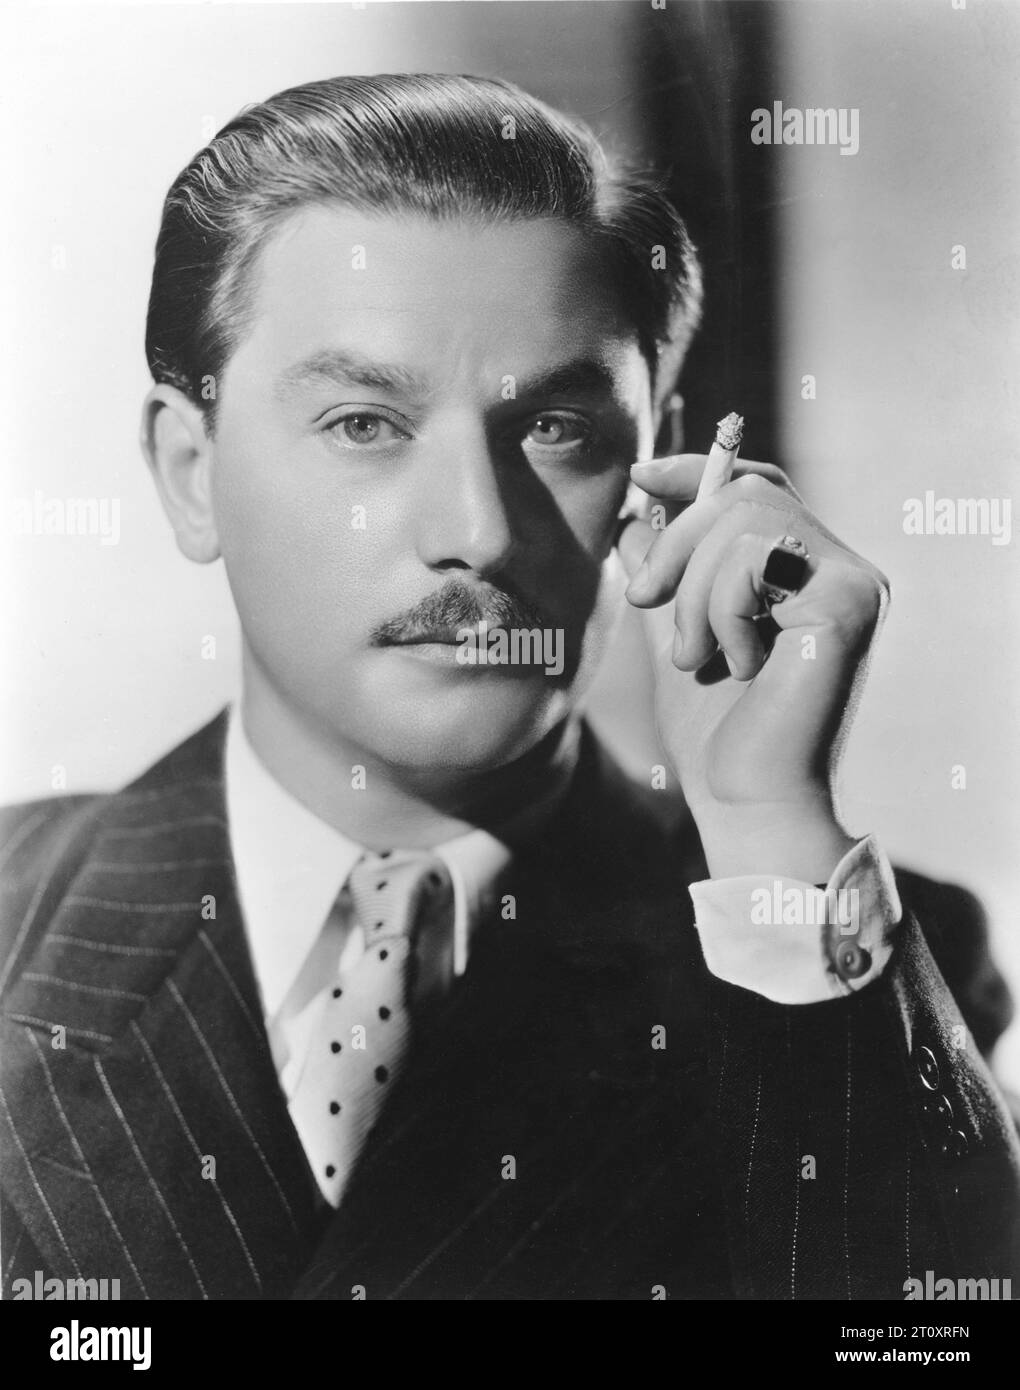 ANTON WALBROOK Portrait holding a cigarette taken in Hollywood in 1937 by Photographer ERNEST A. BACHRACH for RKO Radio Pictures Stock Photo